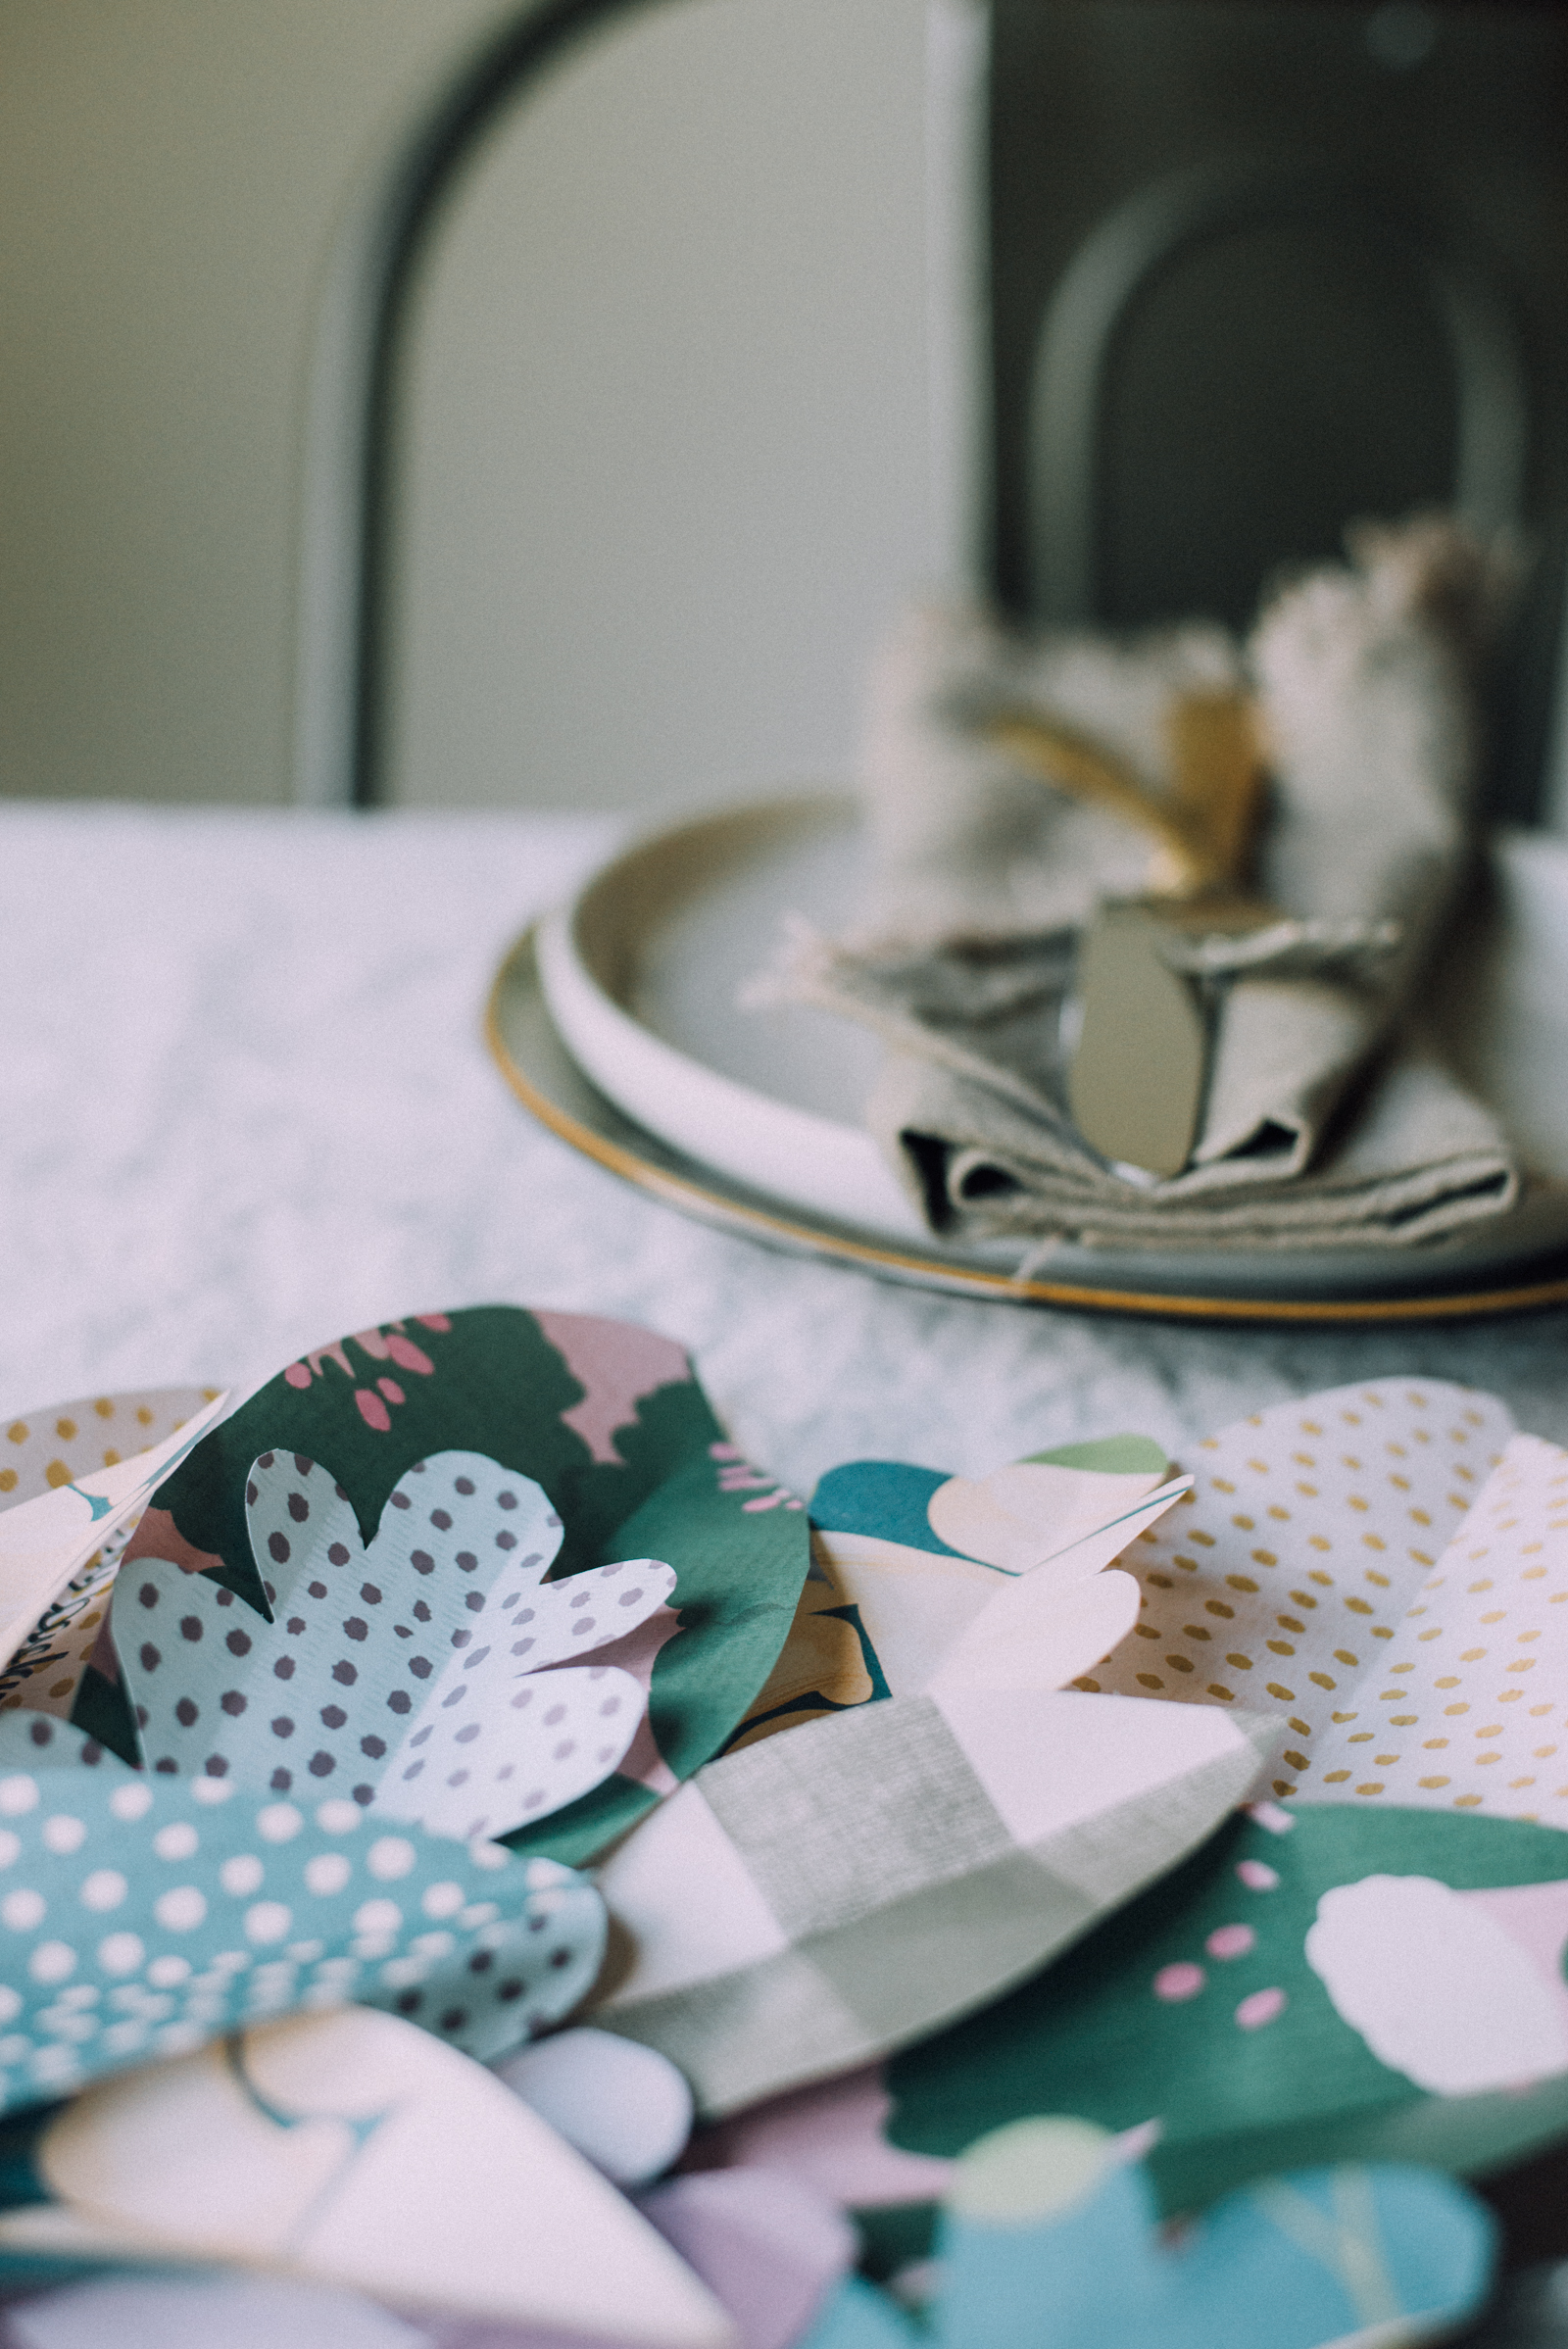 DIY Paper Leaf Thanksgiving Table runner on linen tablecloth